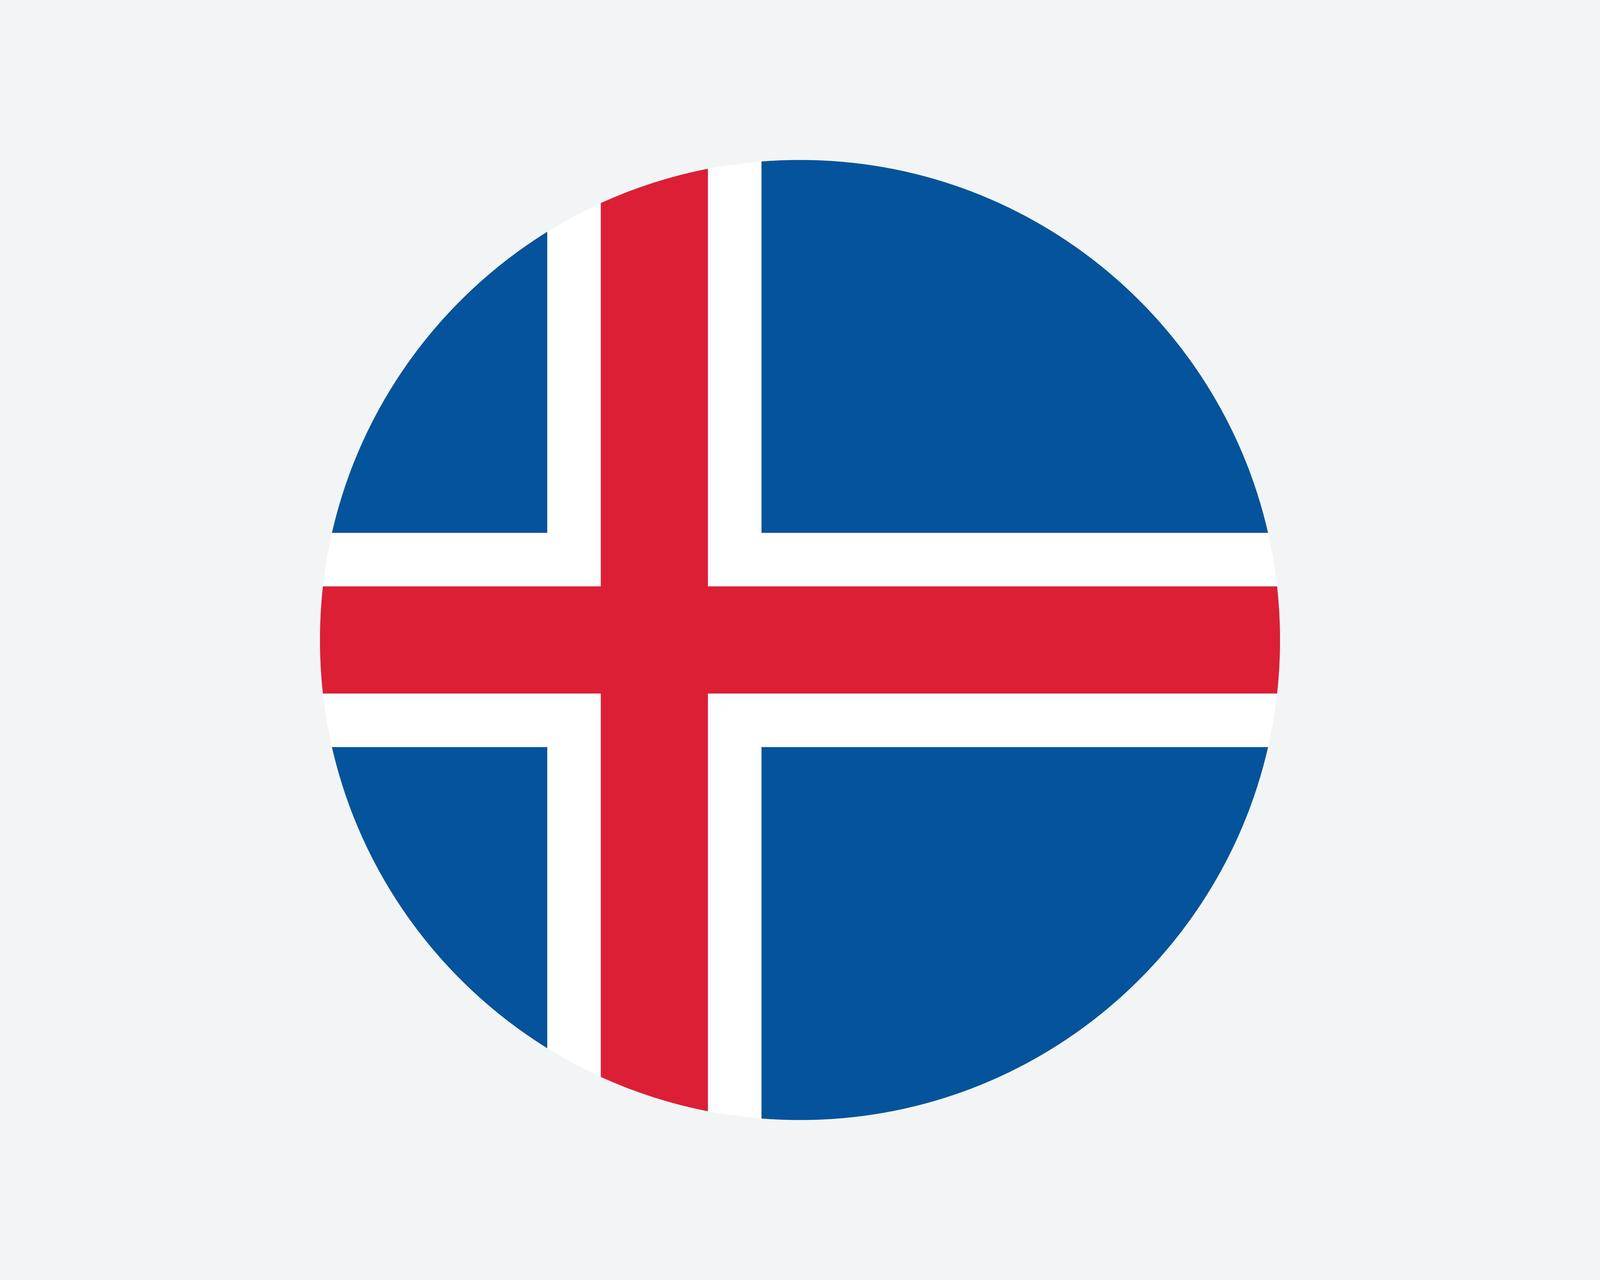 Iceland Round Country Flag. Icelandic Circle National Flag. Iceland Circular Shape Button Banner. EPS Vector Illustration.